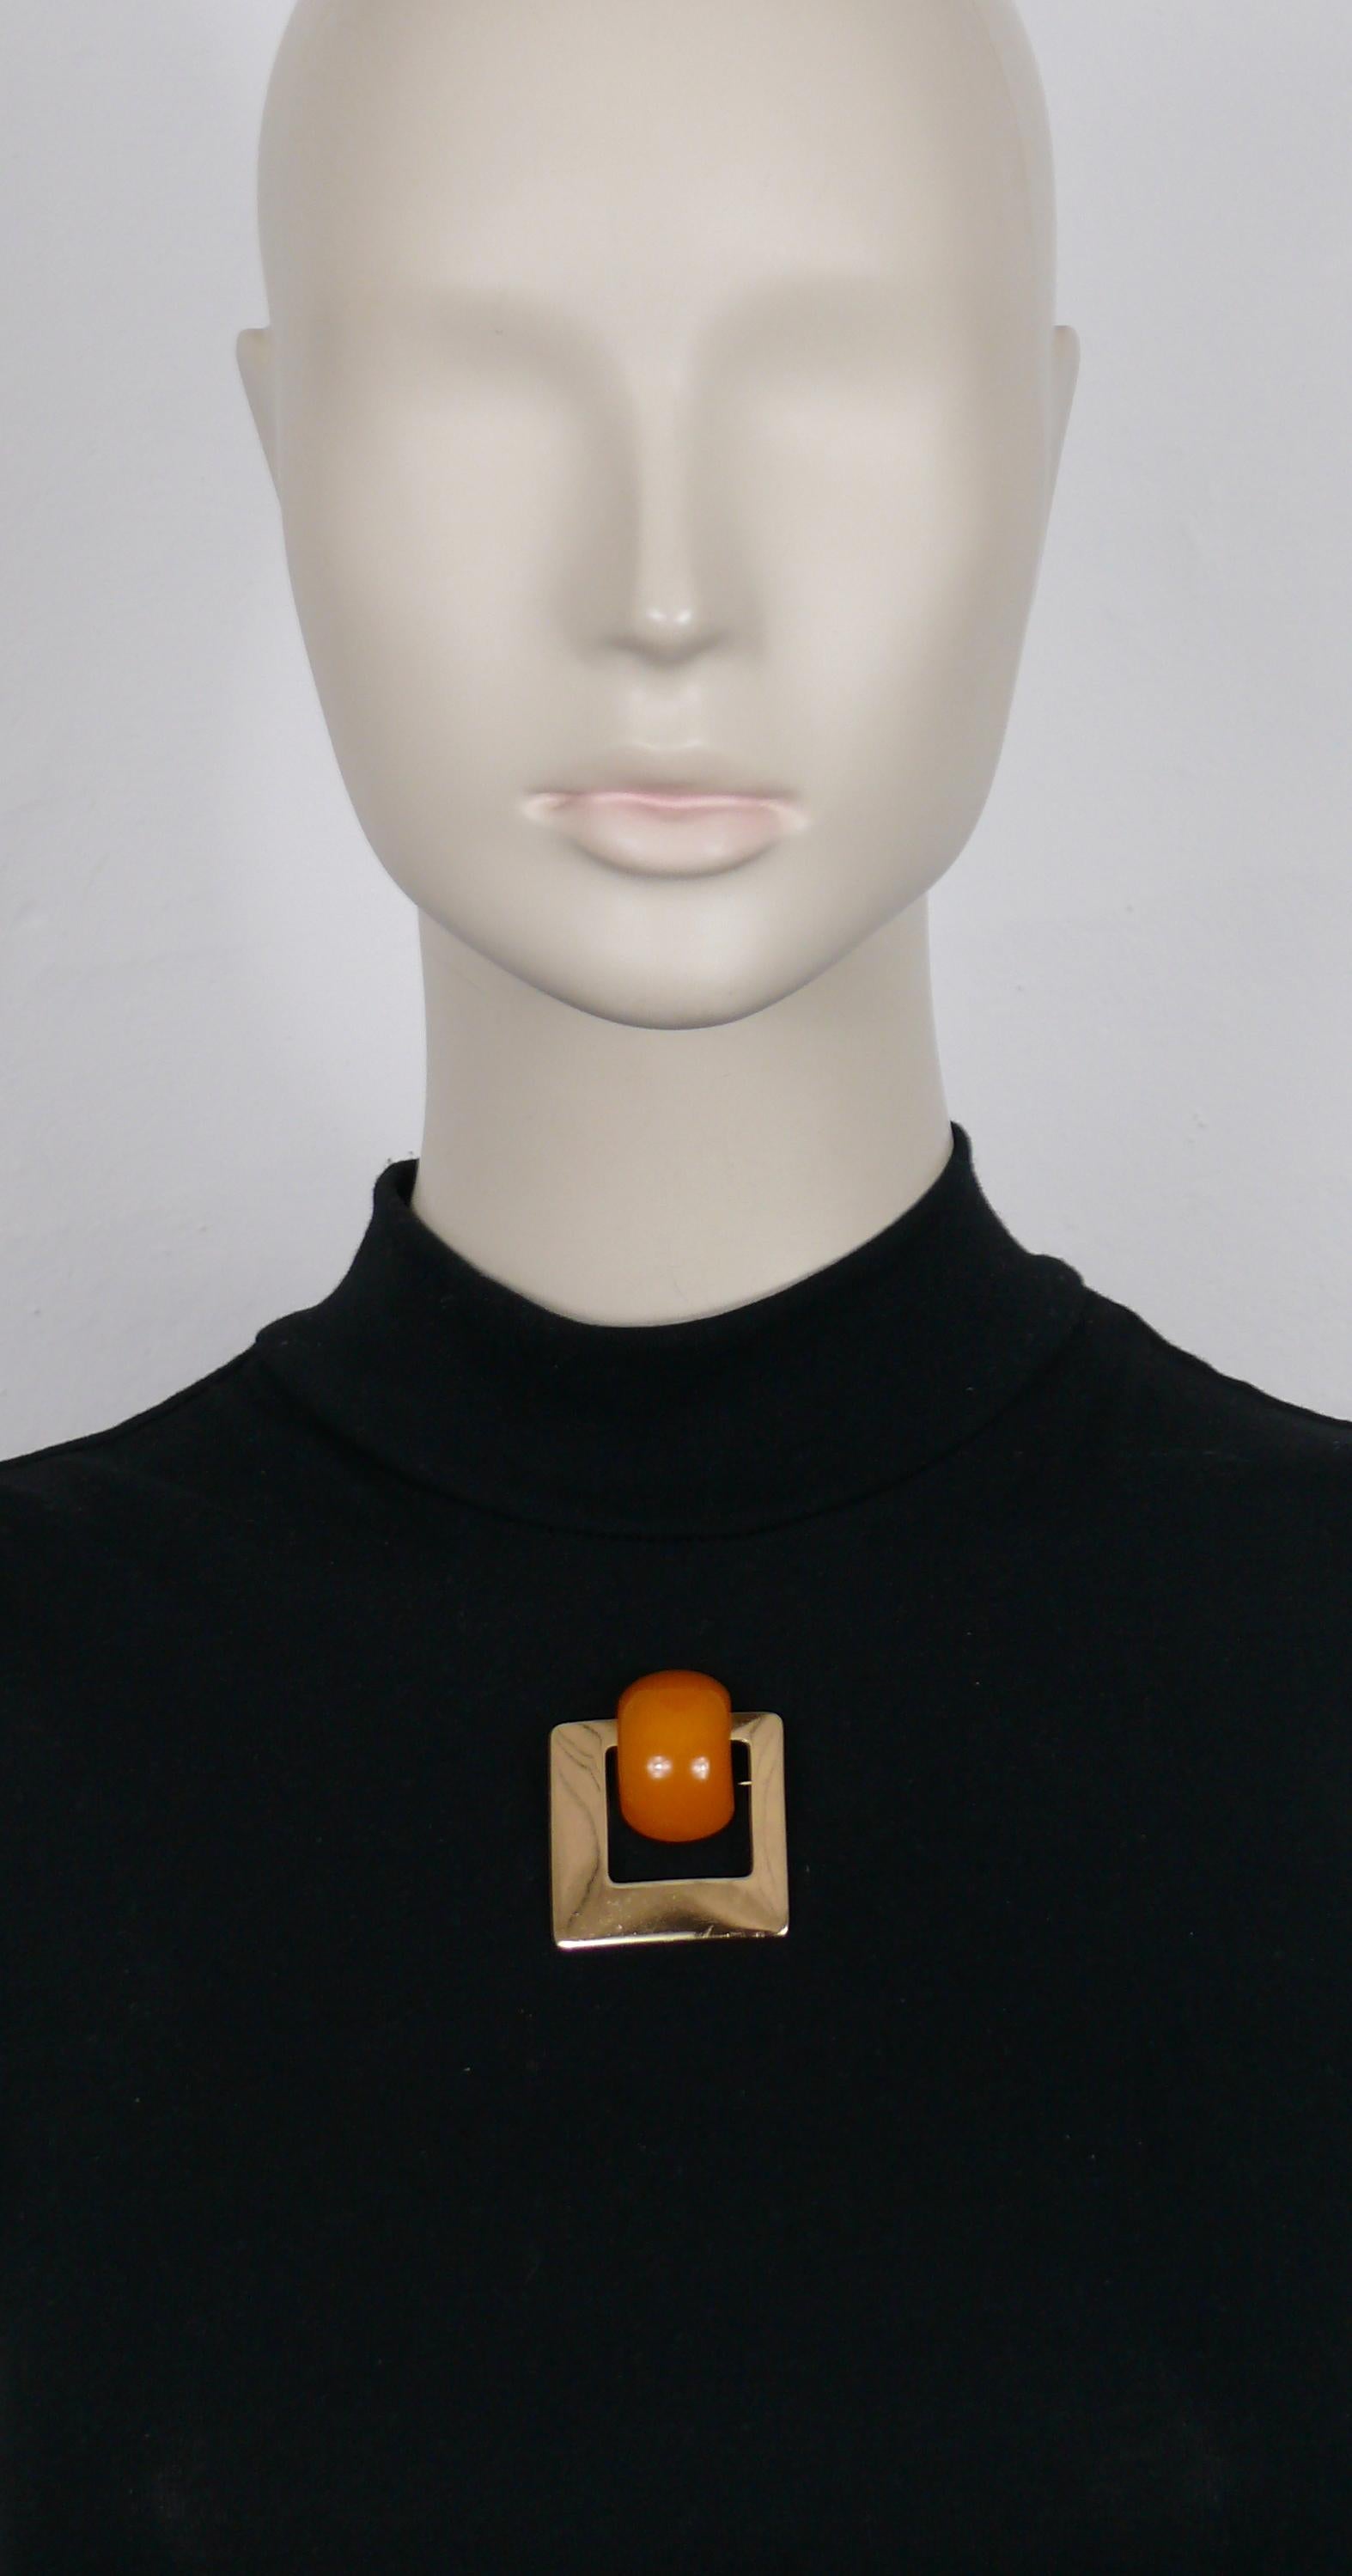 CHRISTIAN DIOR vintage gold tone modernist brooch embellished with an amber color resin cabochon.

Embossed 19 CHR. DIOR © 71 Germany.

Indicative measurements : max. height approx. 4.7 cm (1.85 inches) / max. width approx. 4 cm (1.57